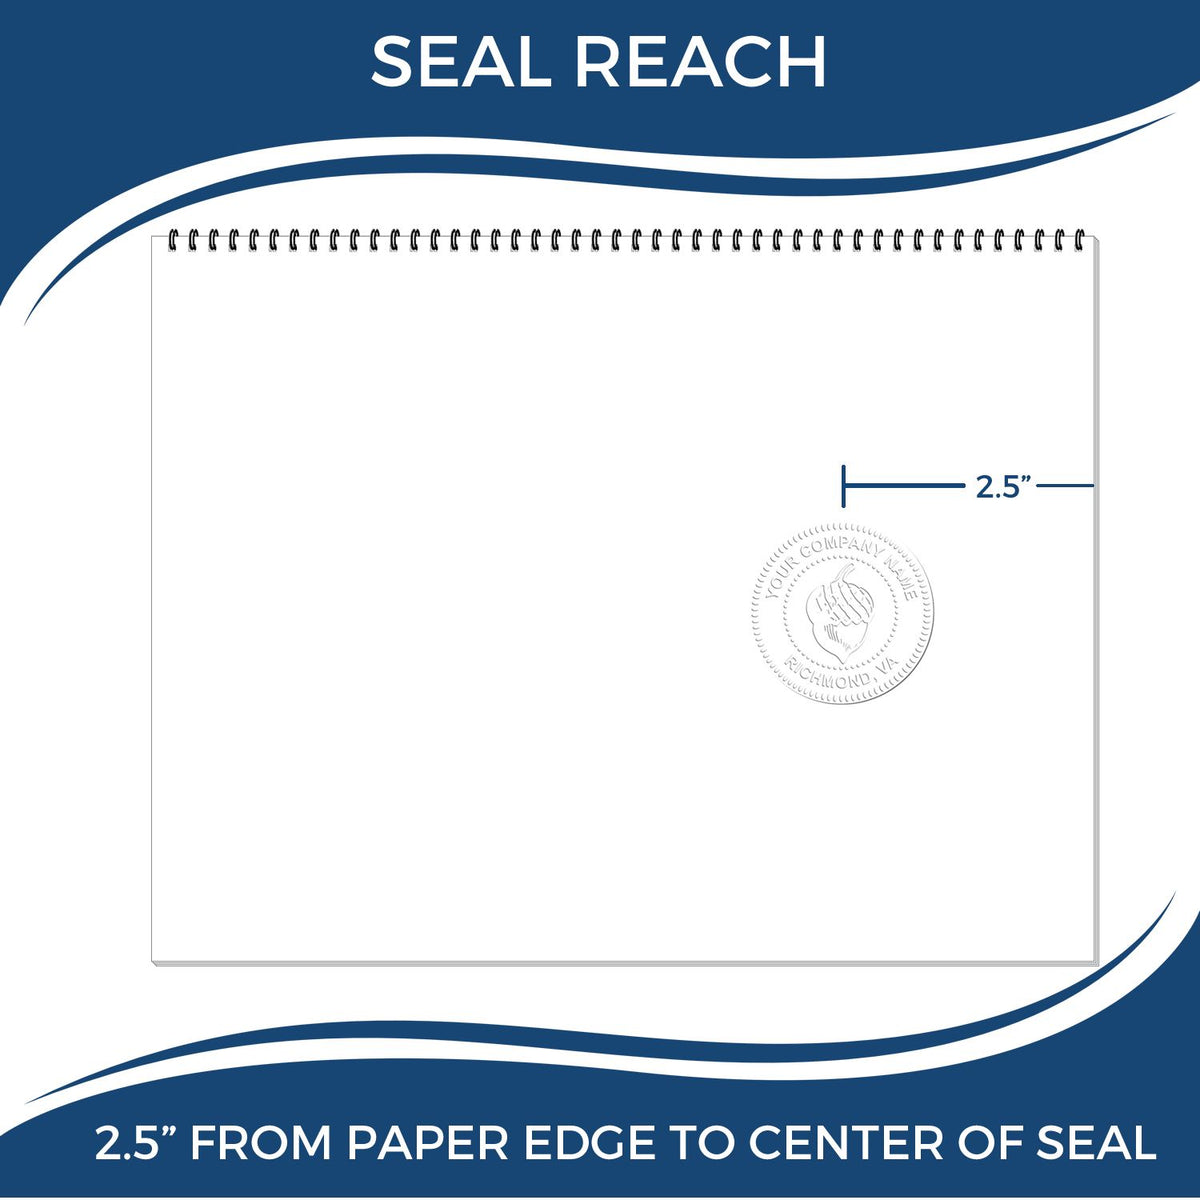 An infographic showing the seal reach which is represented by a ruler and a miniature seal image of the Heavy Duty Cast Iron Illinois Architect Embosser